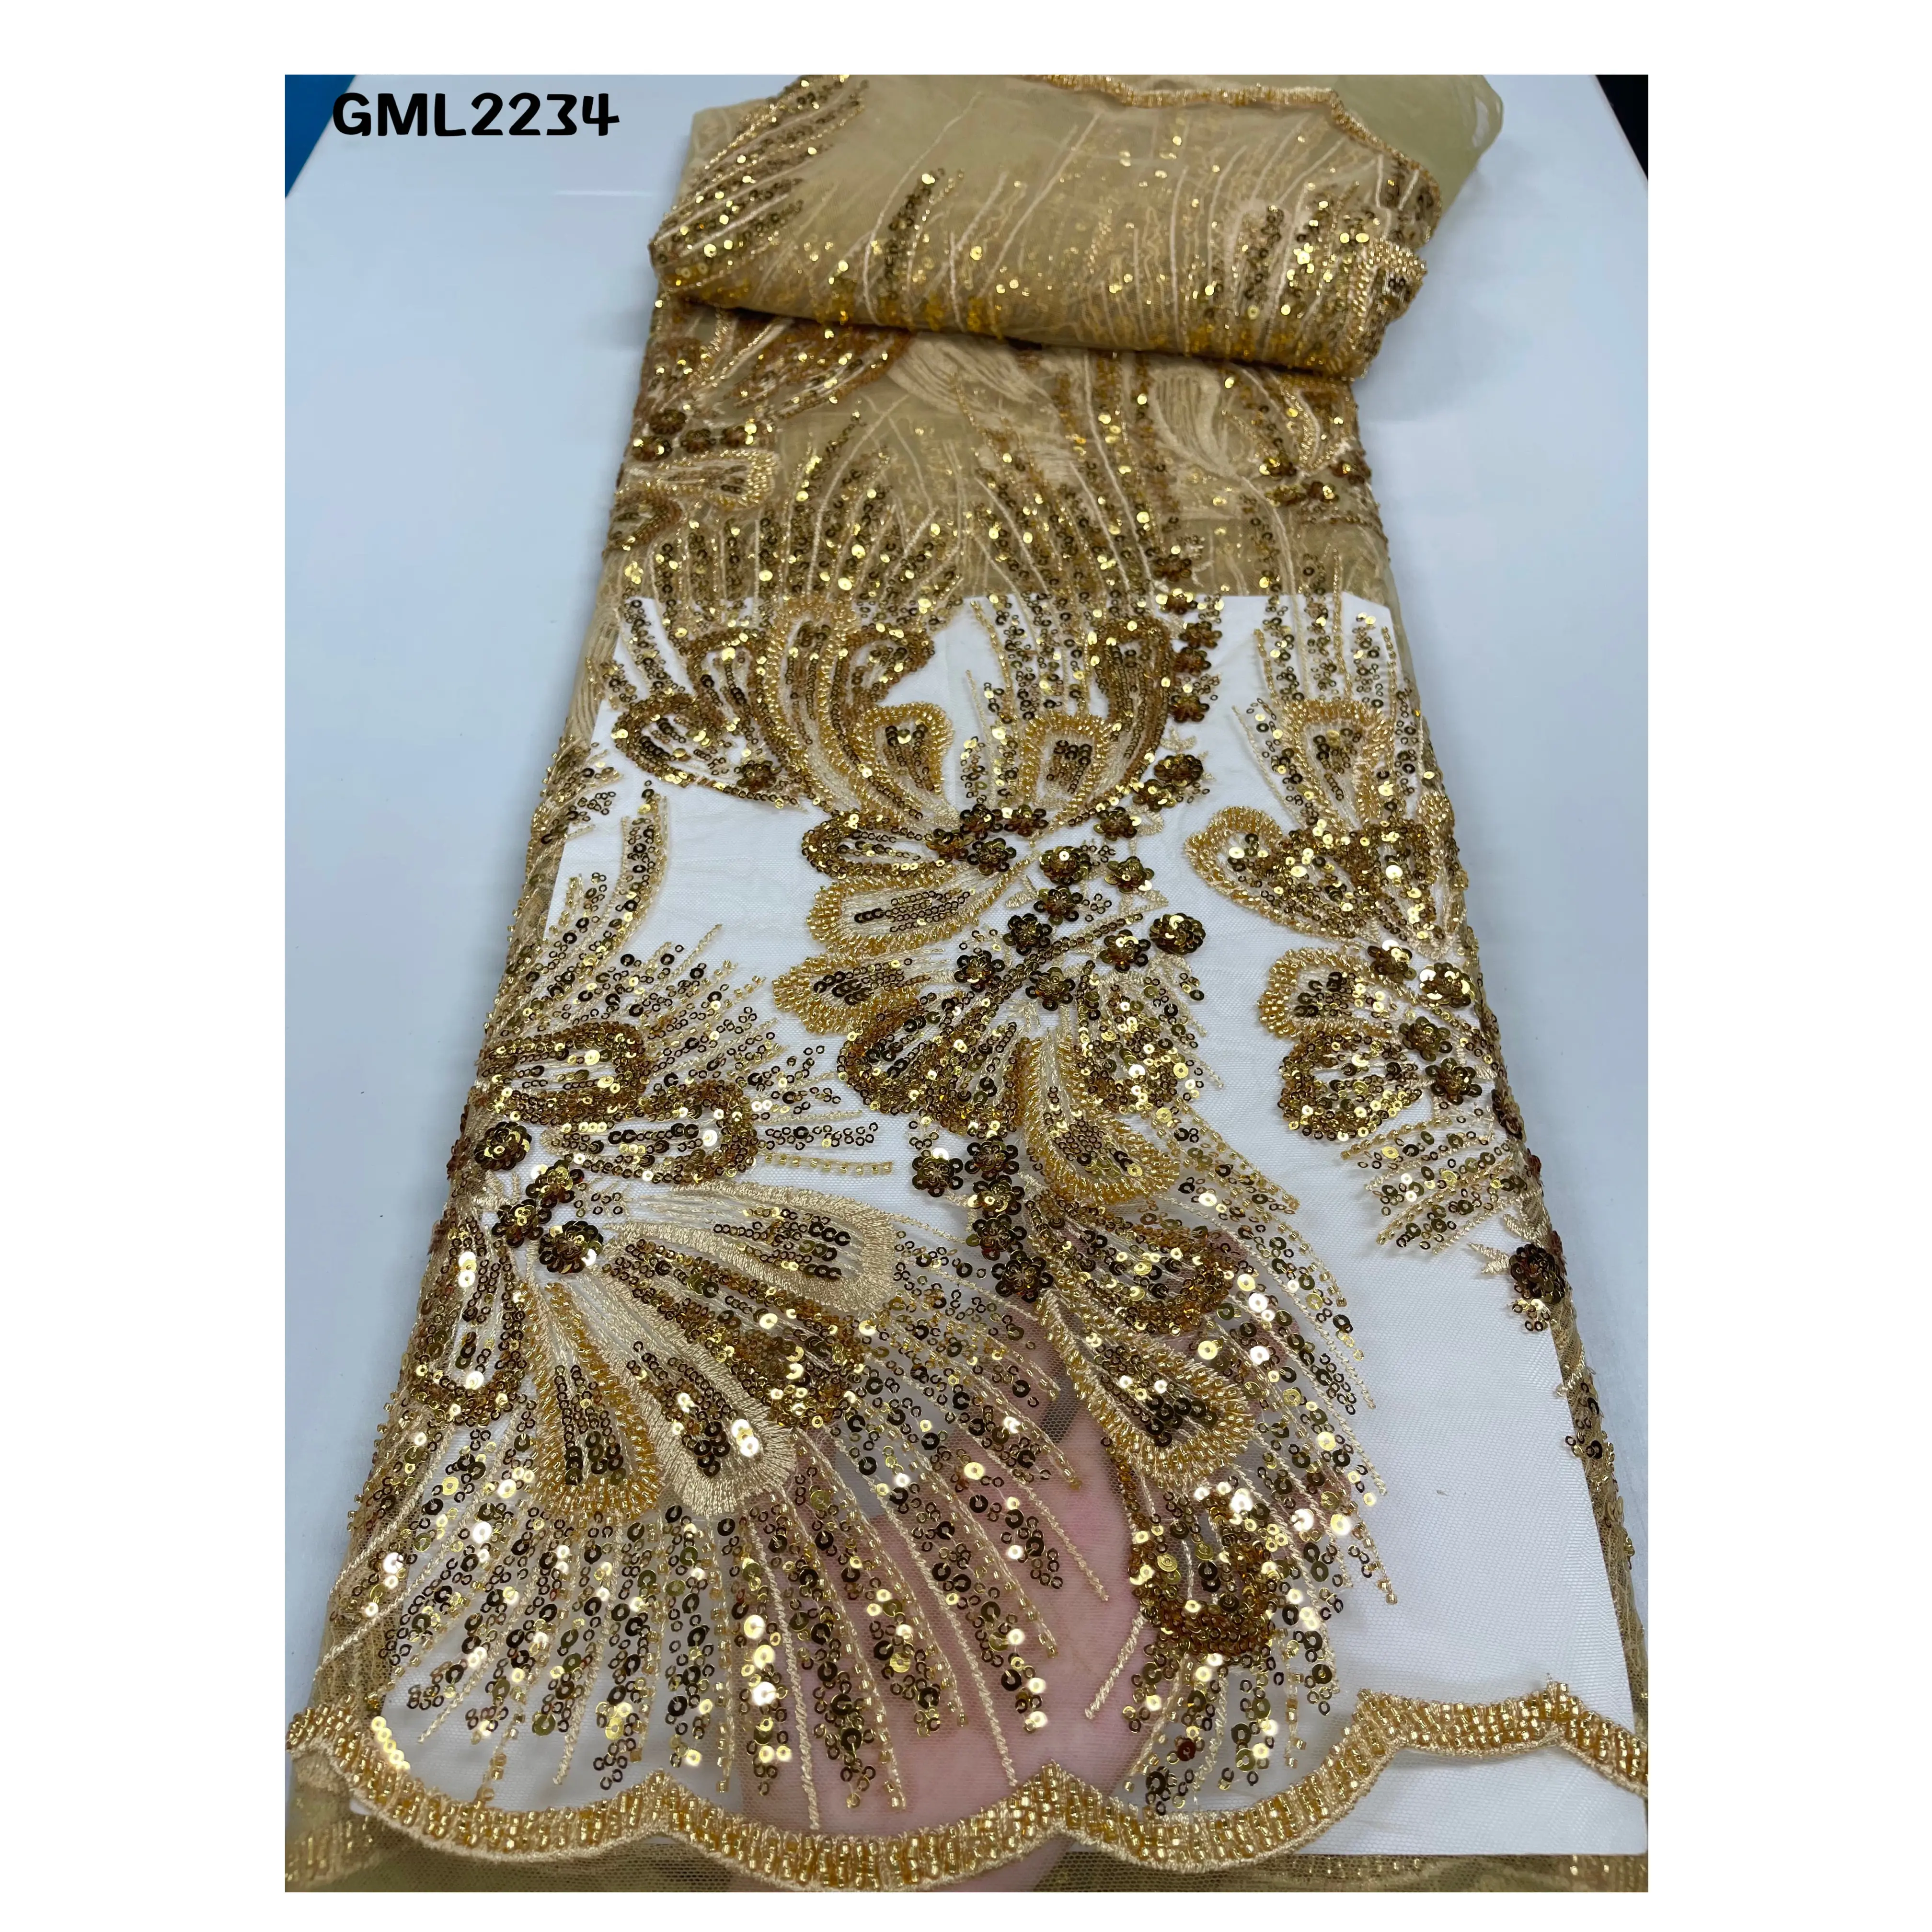 Shinny material nigerian dress 2022 bridal fabric lace shiny sequin beaded African big sequins lace embroidered fabric